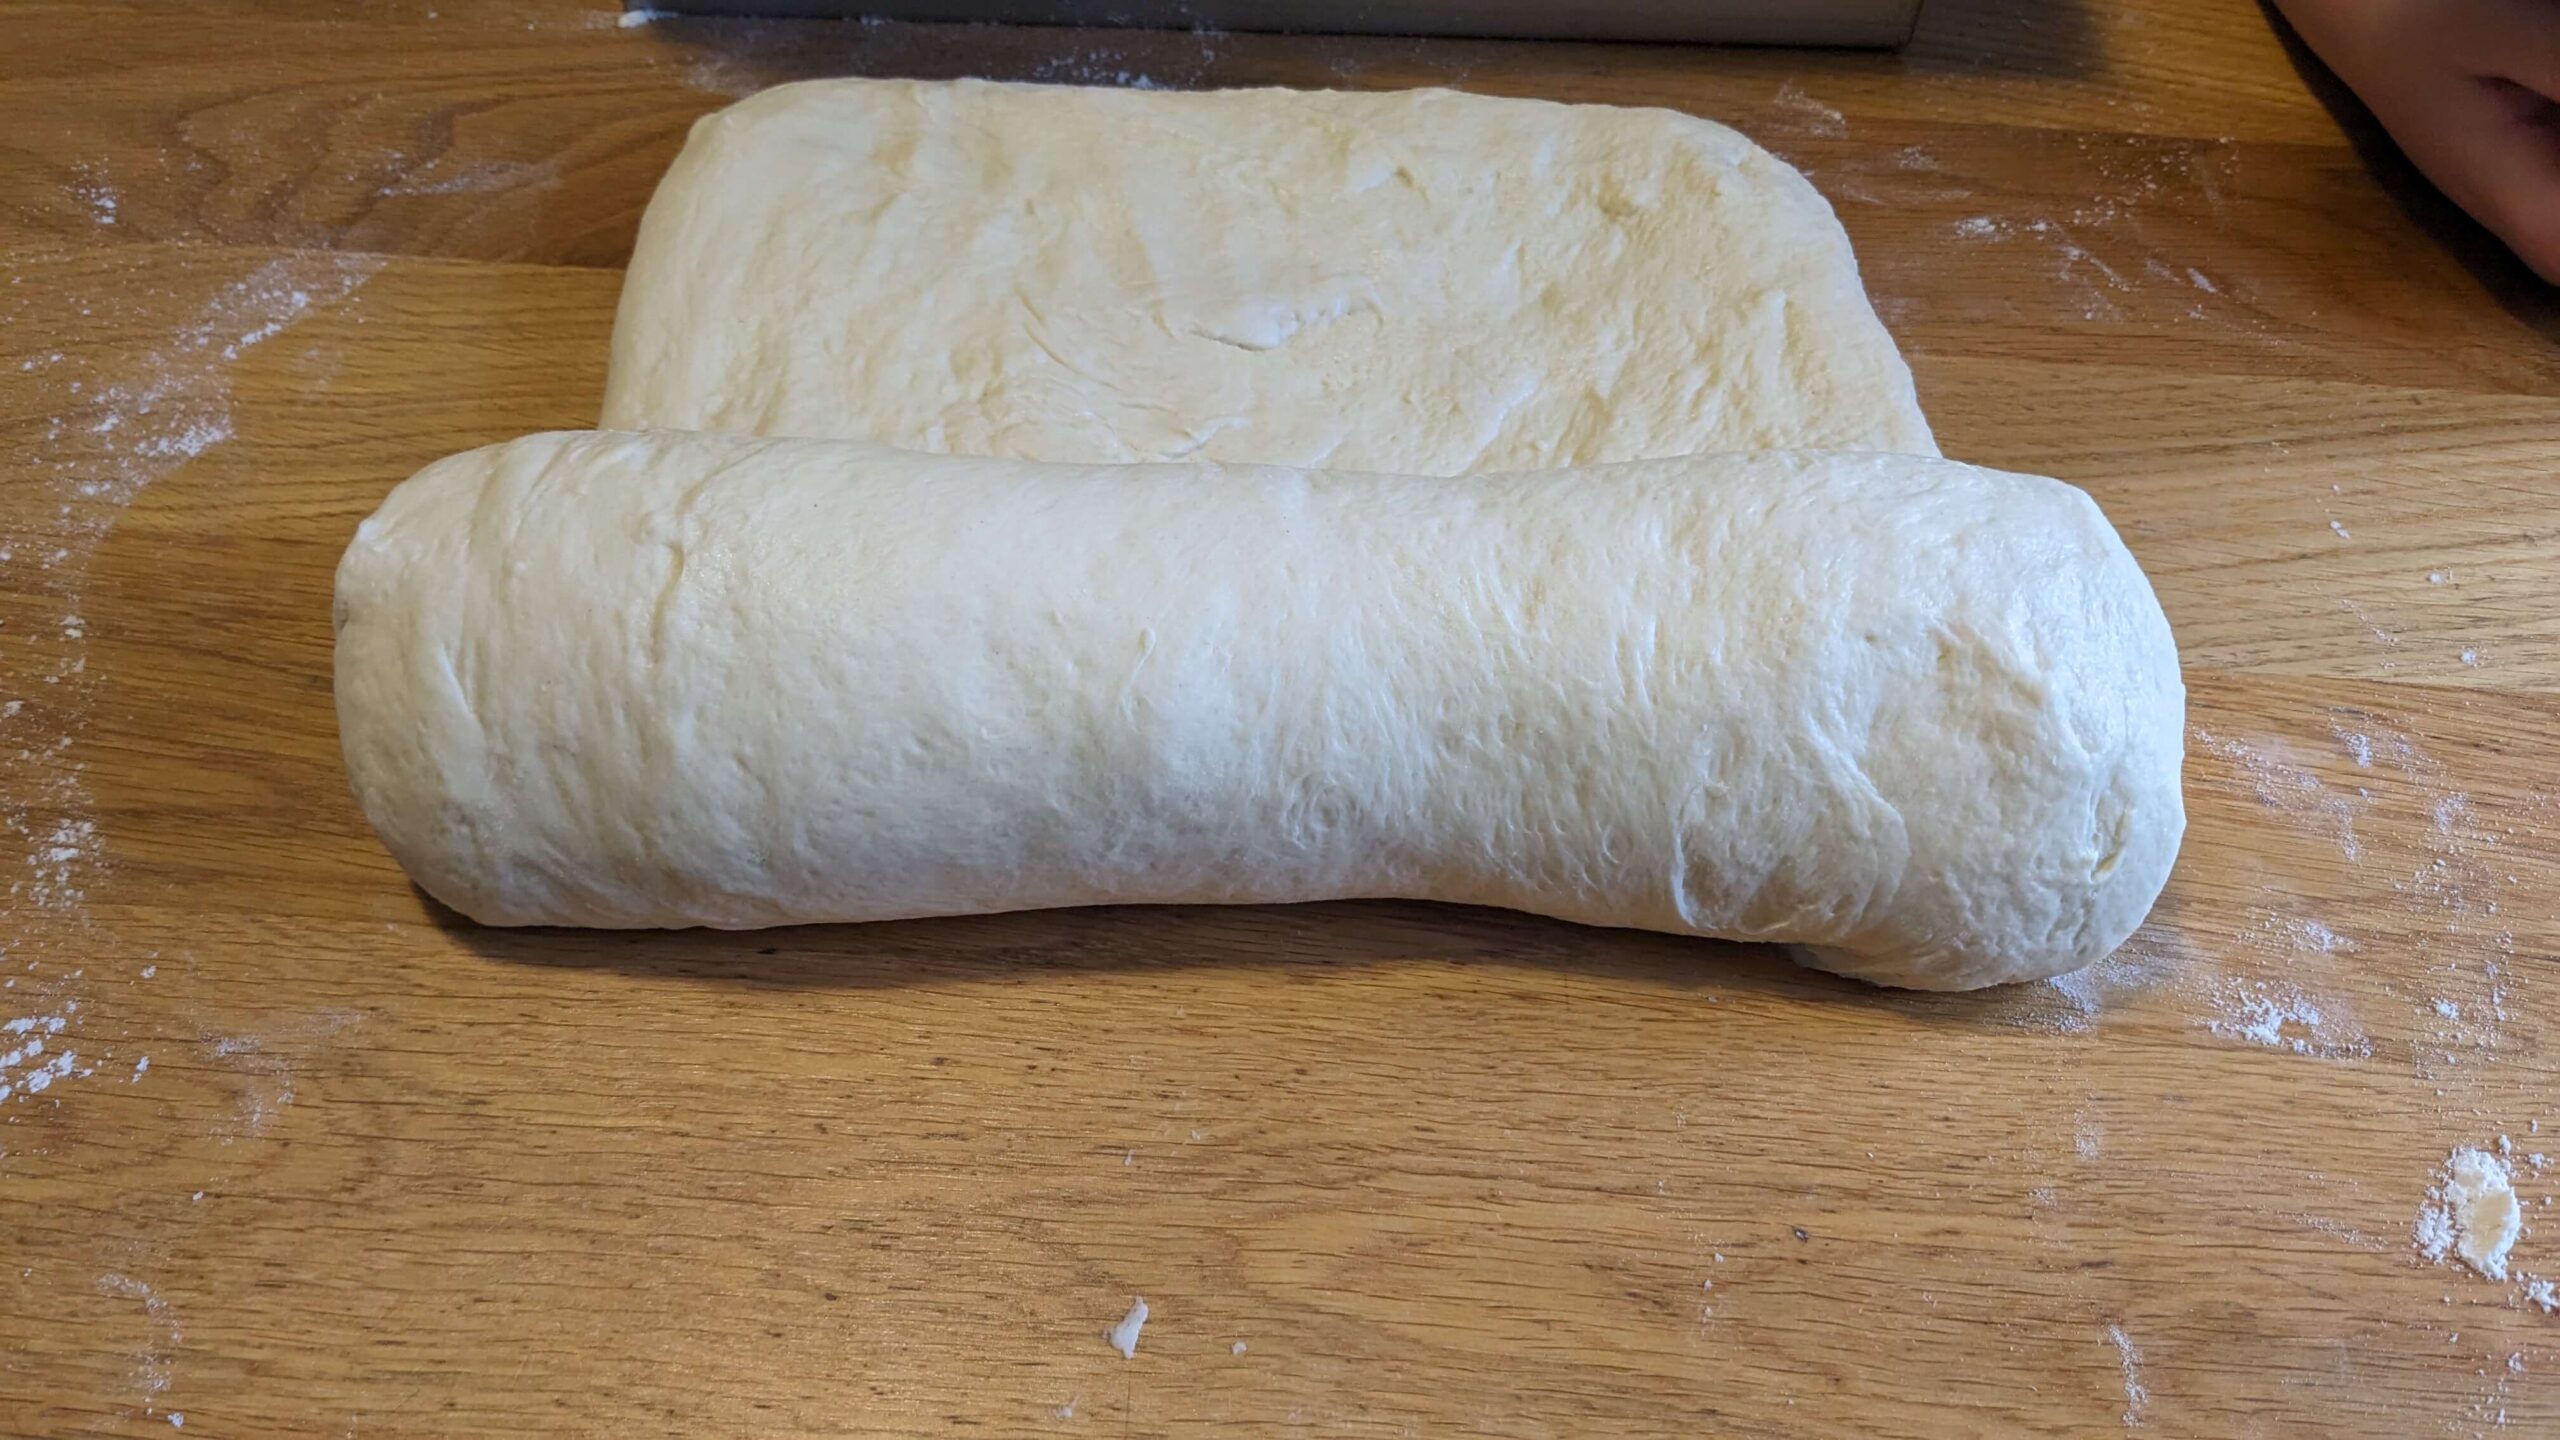 rectangle of bread dough half rolled on a wooden surface